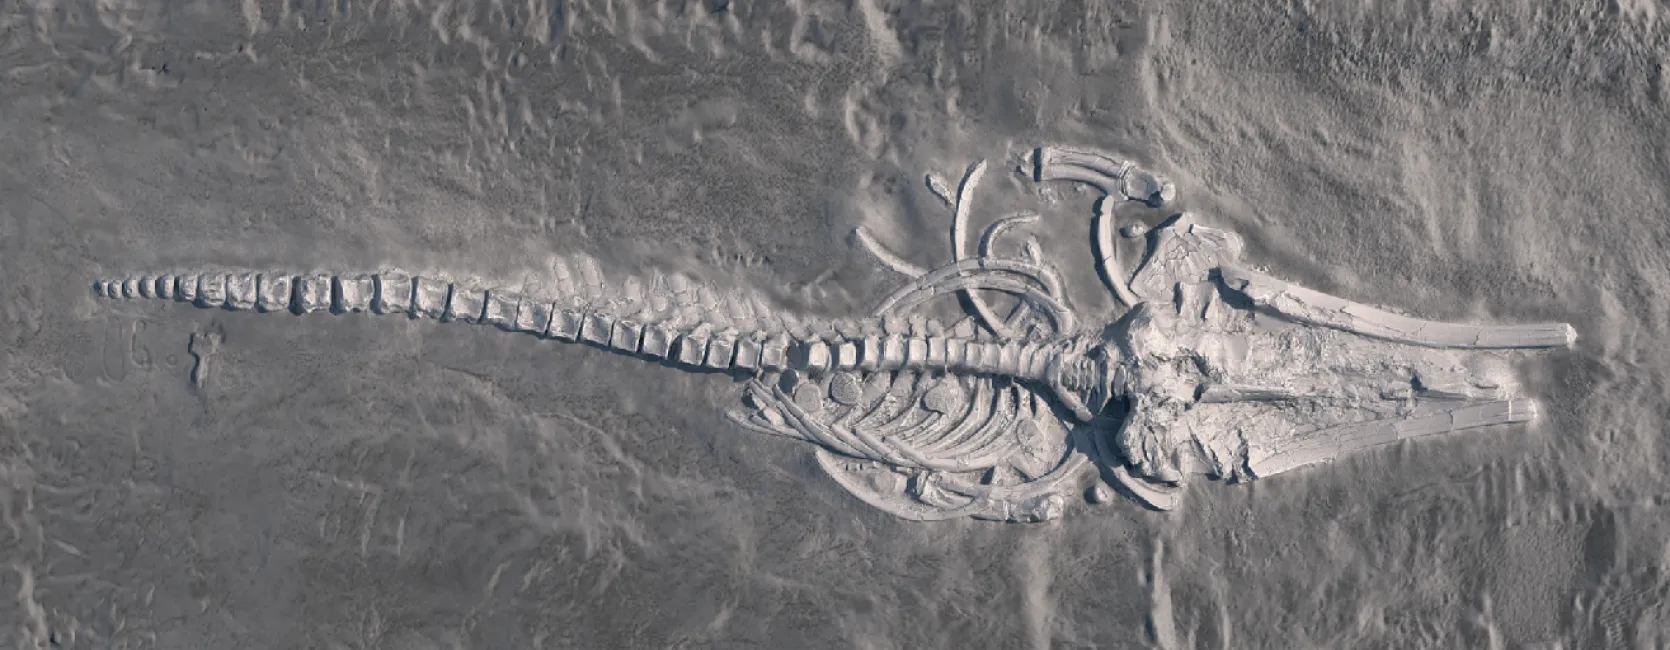 An image of a fossil rorqual whale